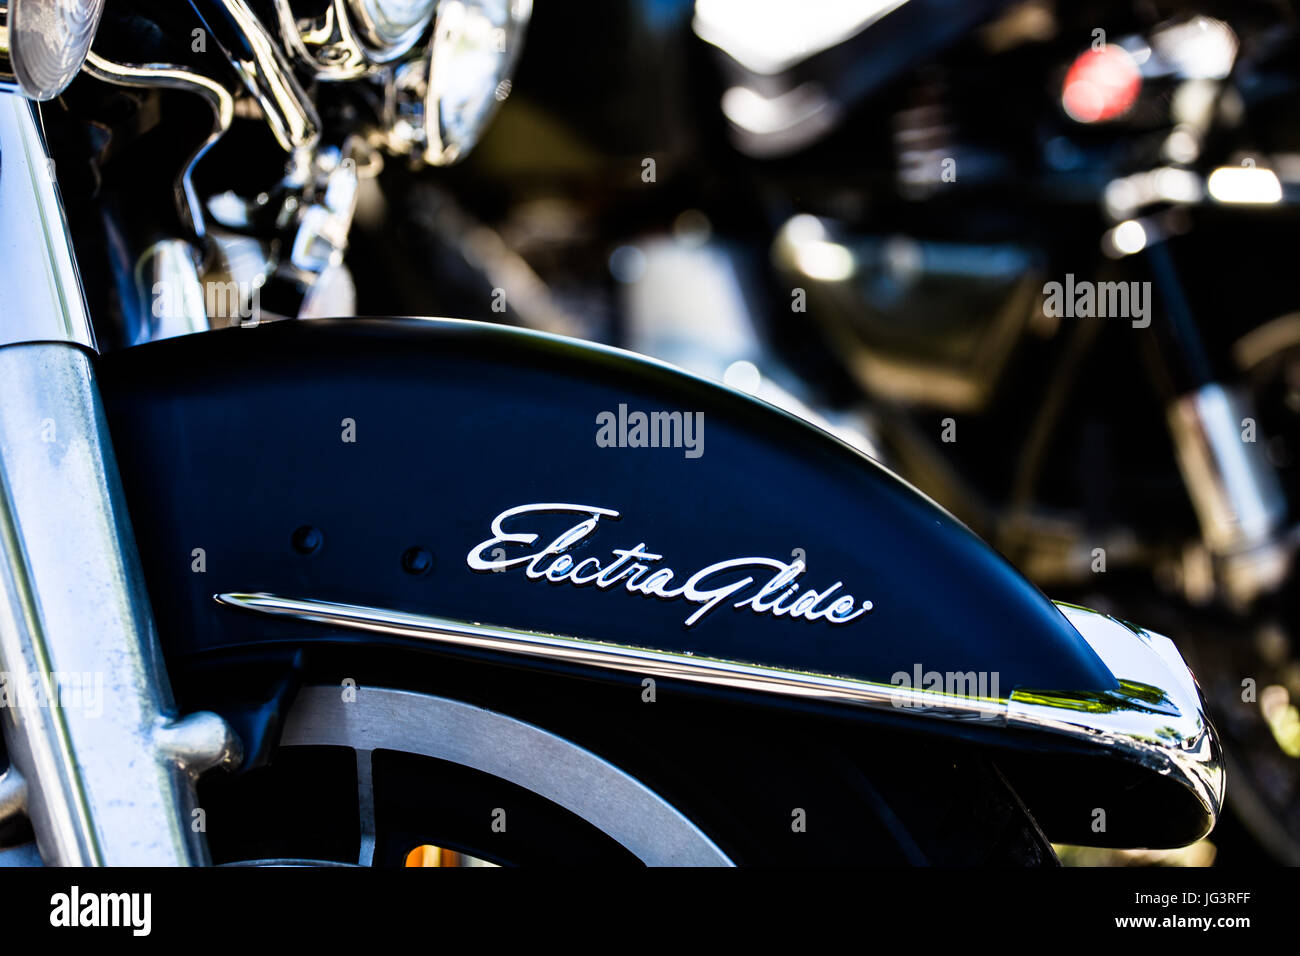 'Electra Glide' name on a black fender of a 'Harley Davidson Electra Glide' motorcycle. Stock Photo